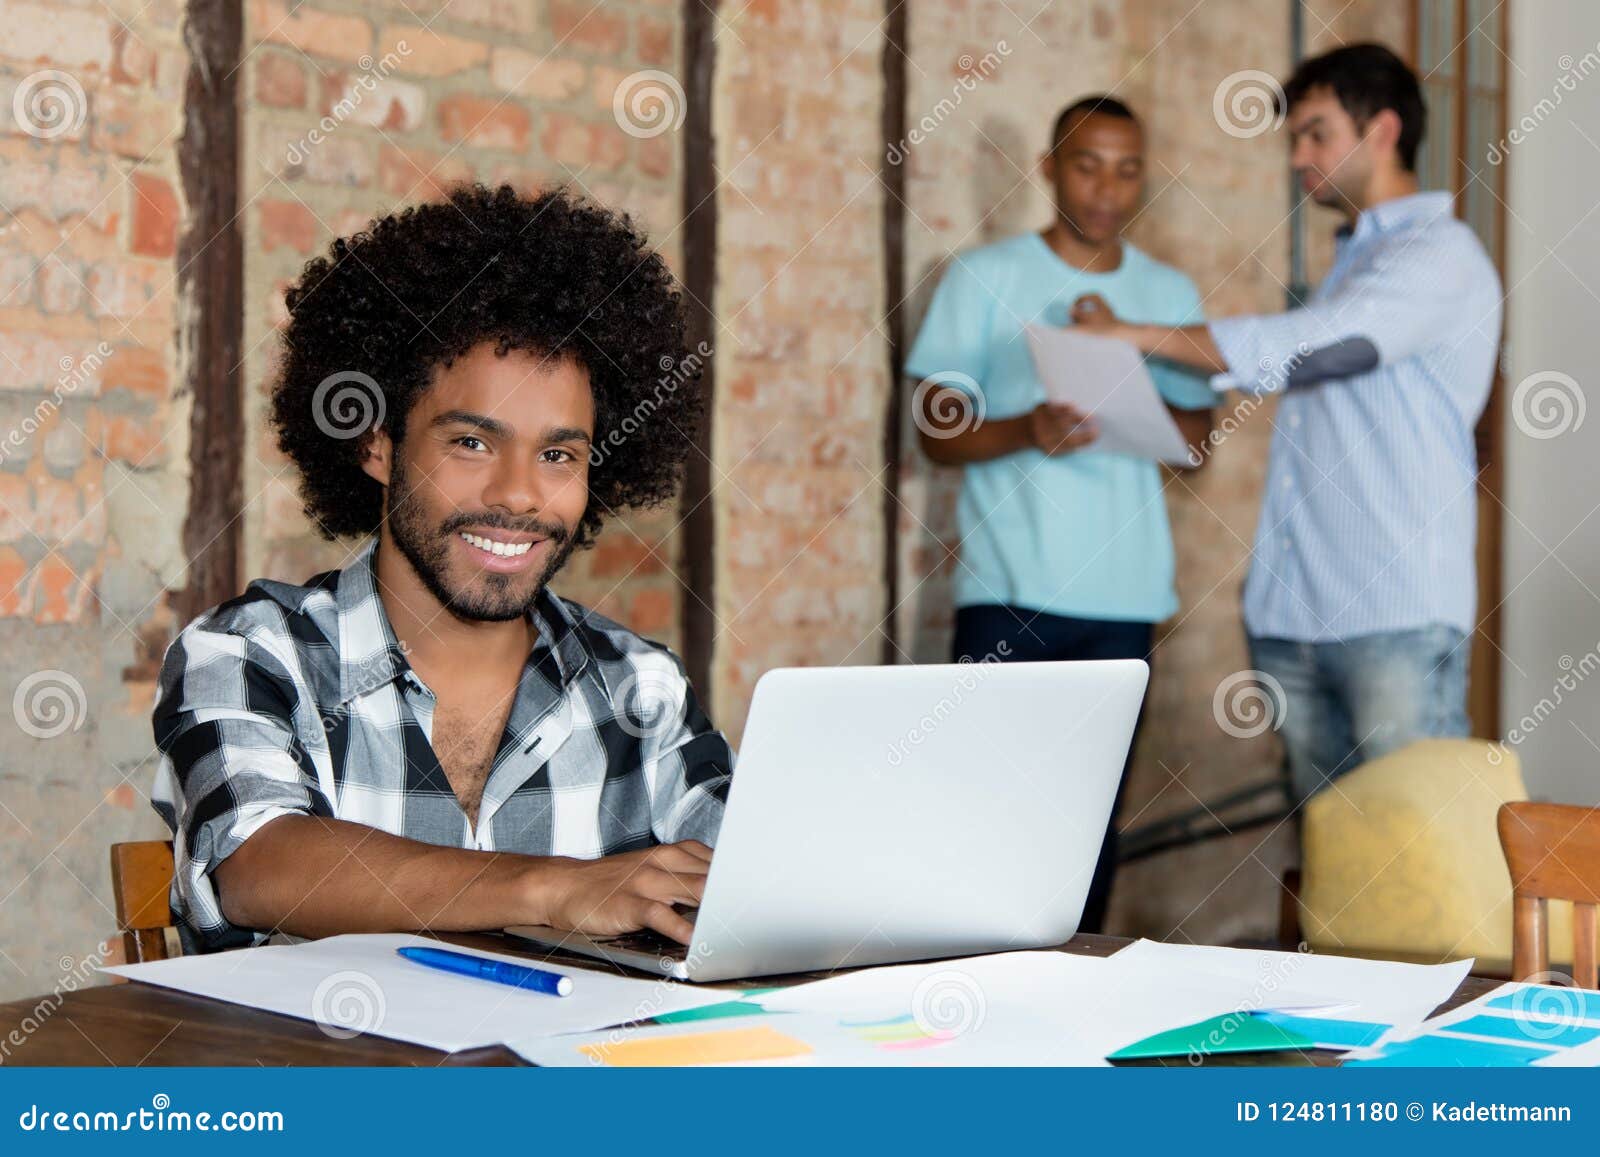 laughing african american hipster software developer at computer